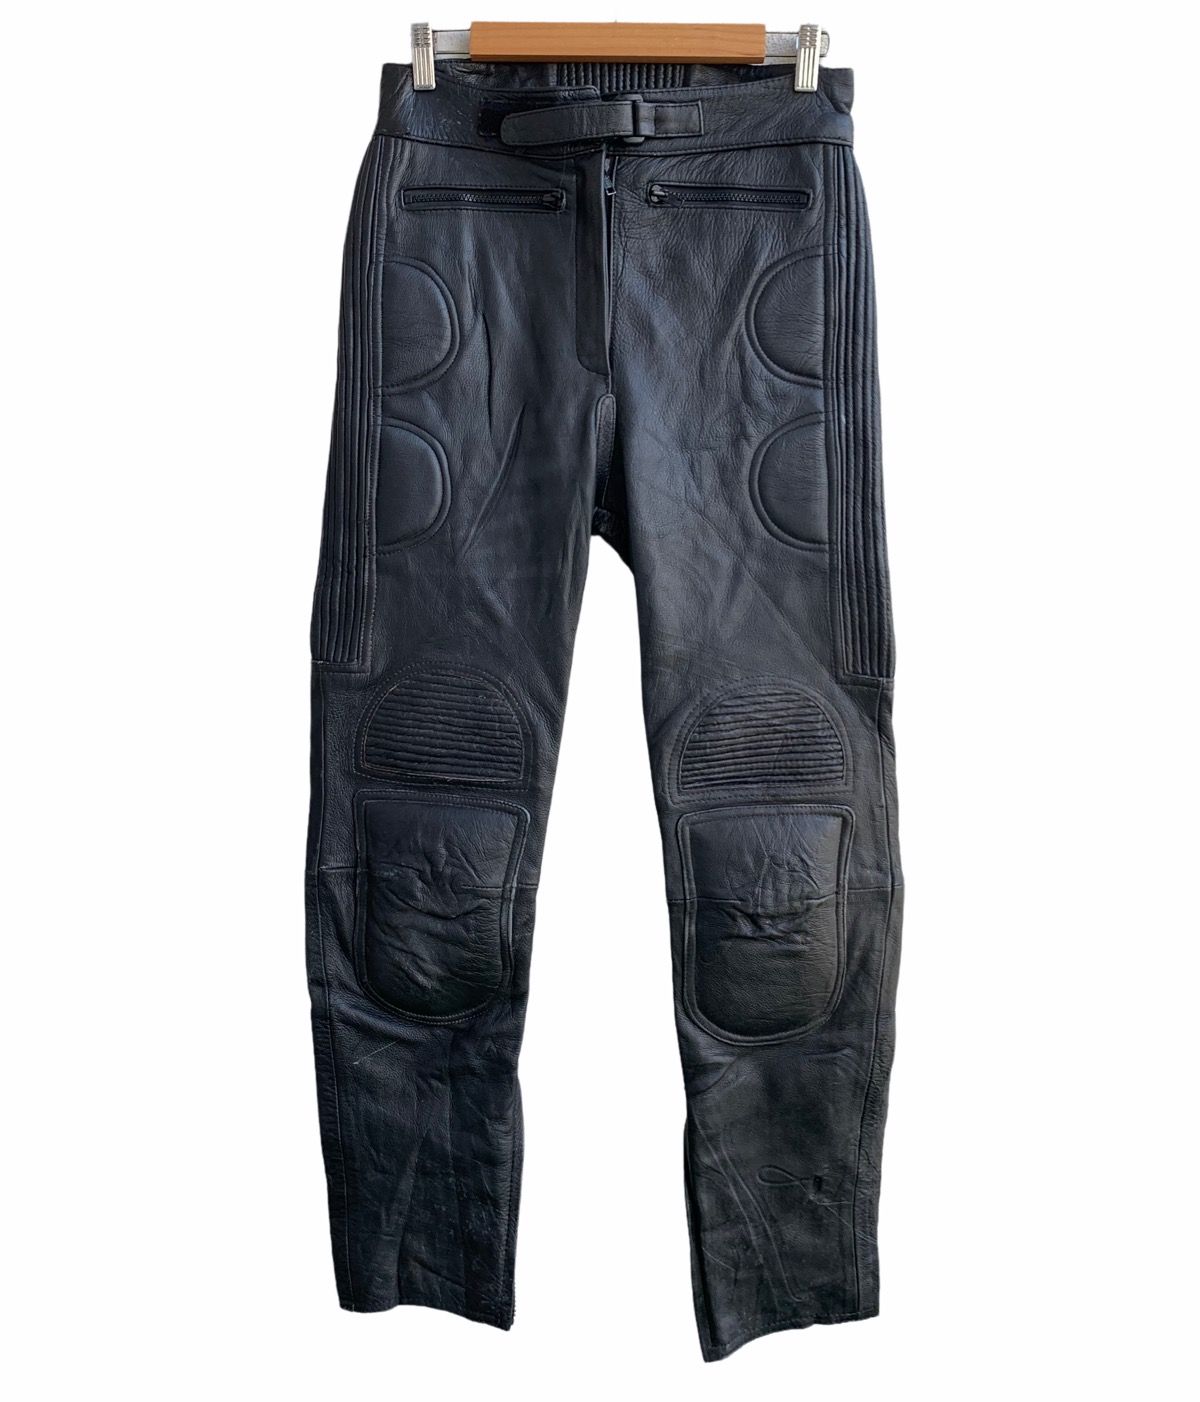 Pre-owned Genuine Leather X Indian Motercycles Vintage Retro Biker Leather Pants In Black